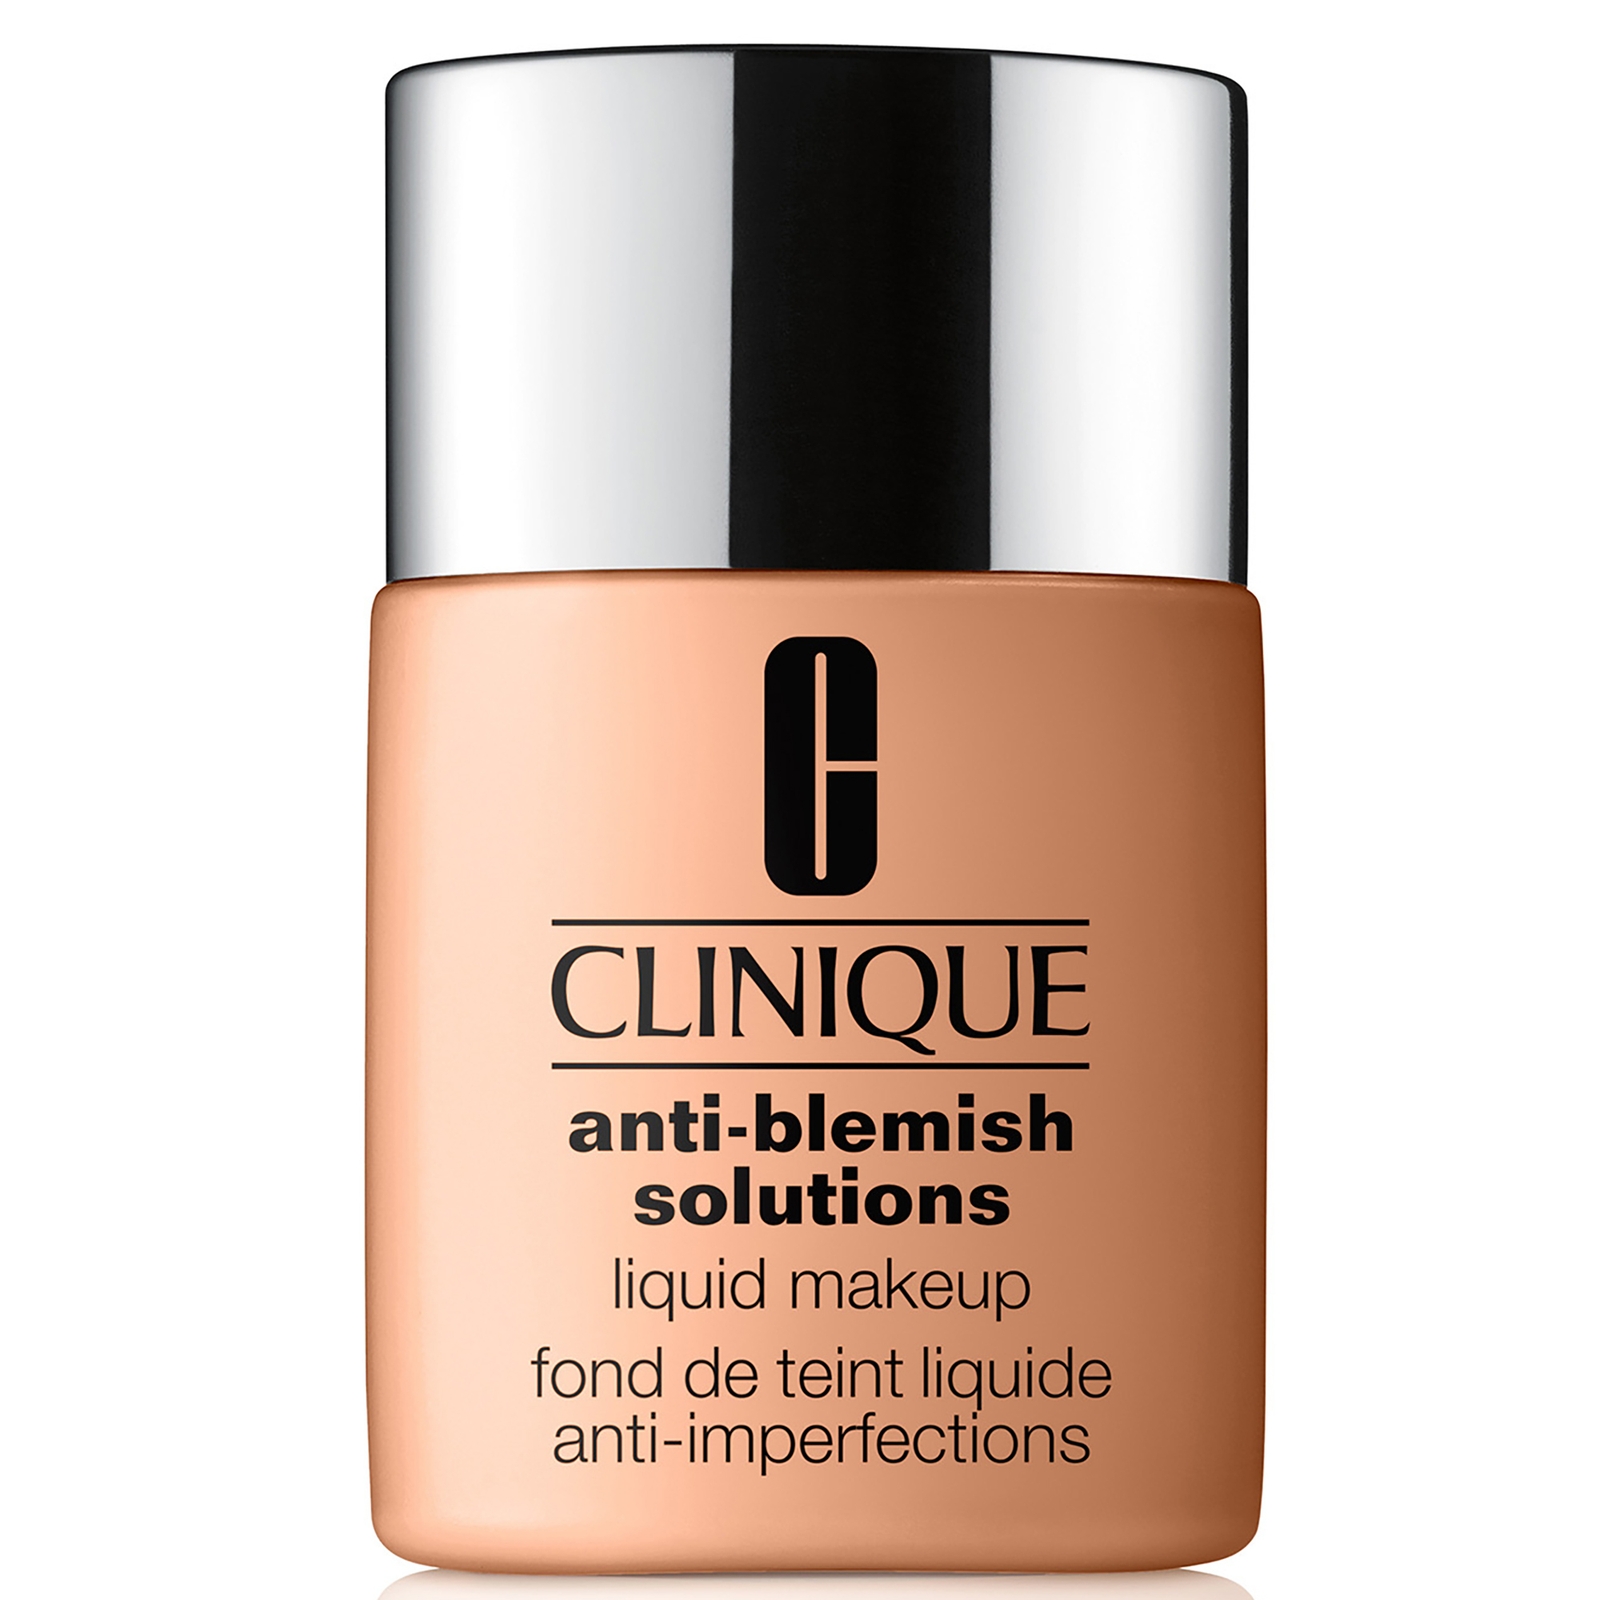 Image of Clinique Anti-Blemish Solutions Liquid Makeup with Salicylic Acid 30ml (Various Shades) - CN 52 Neutral